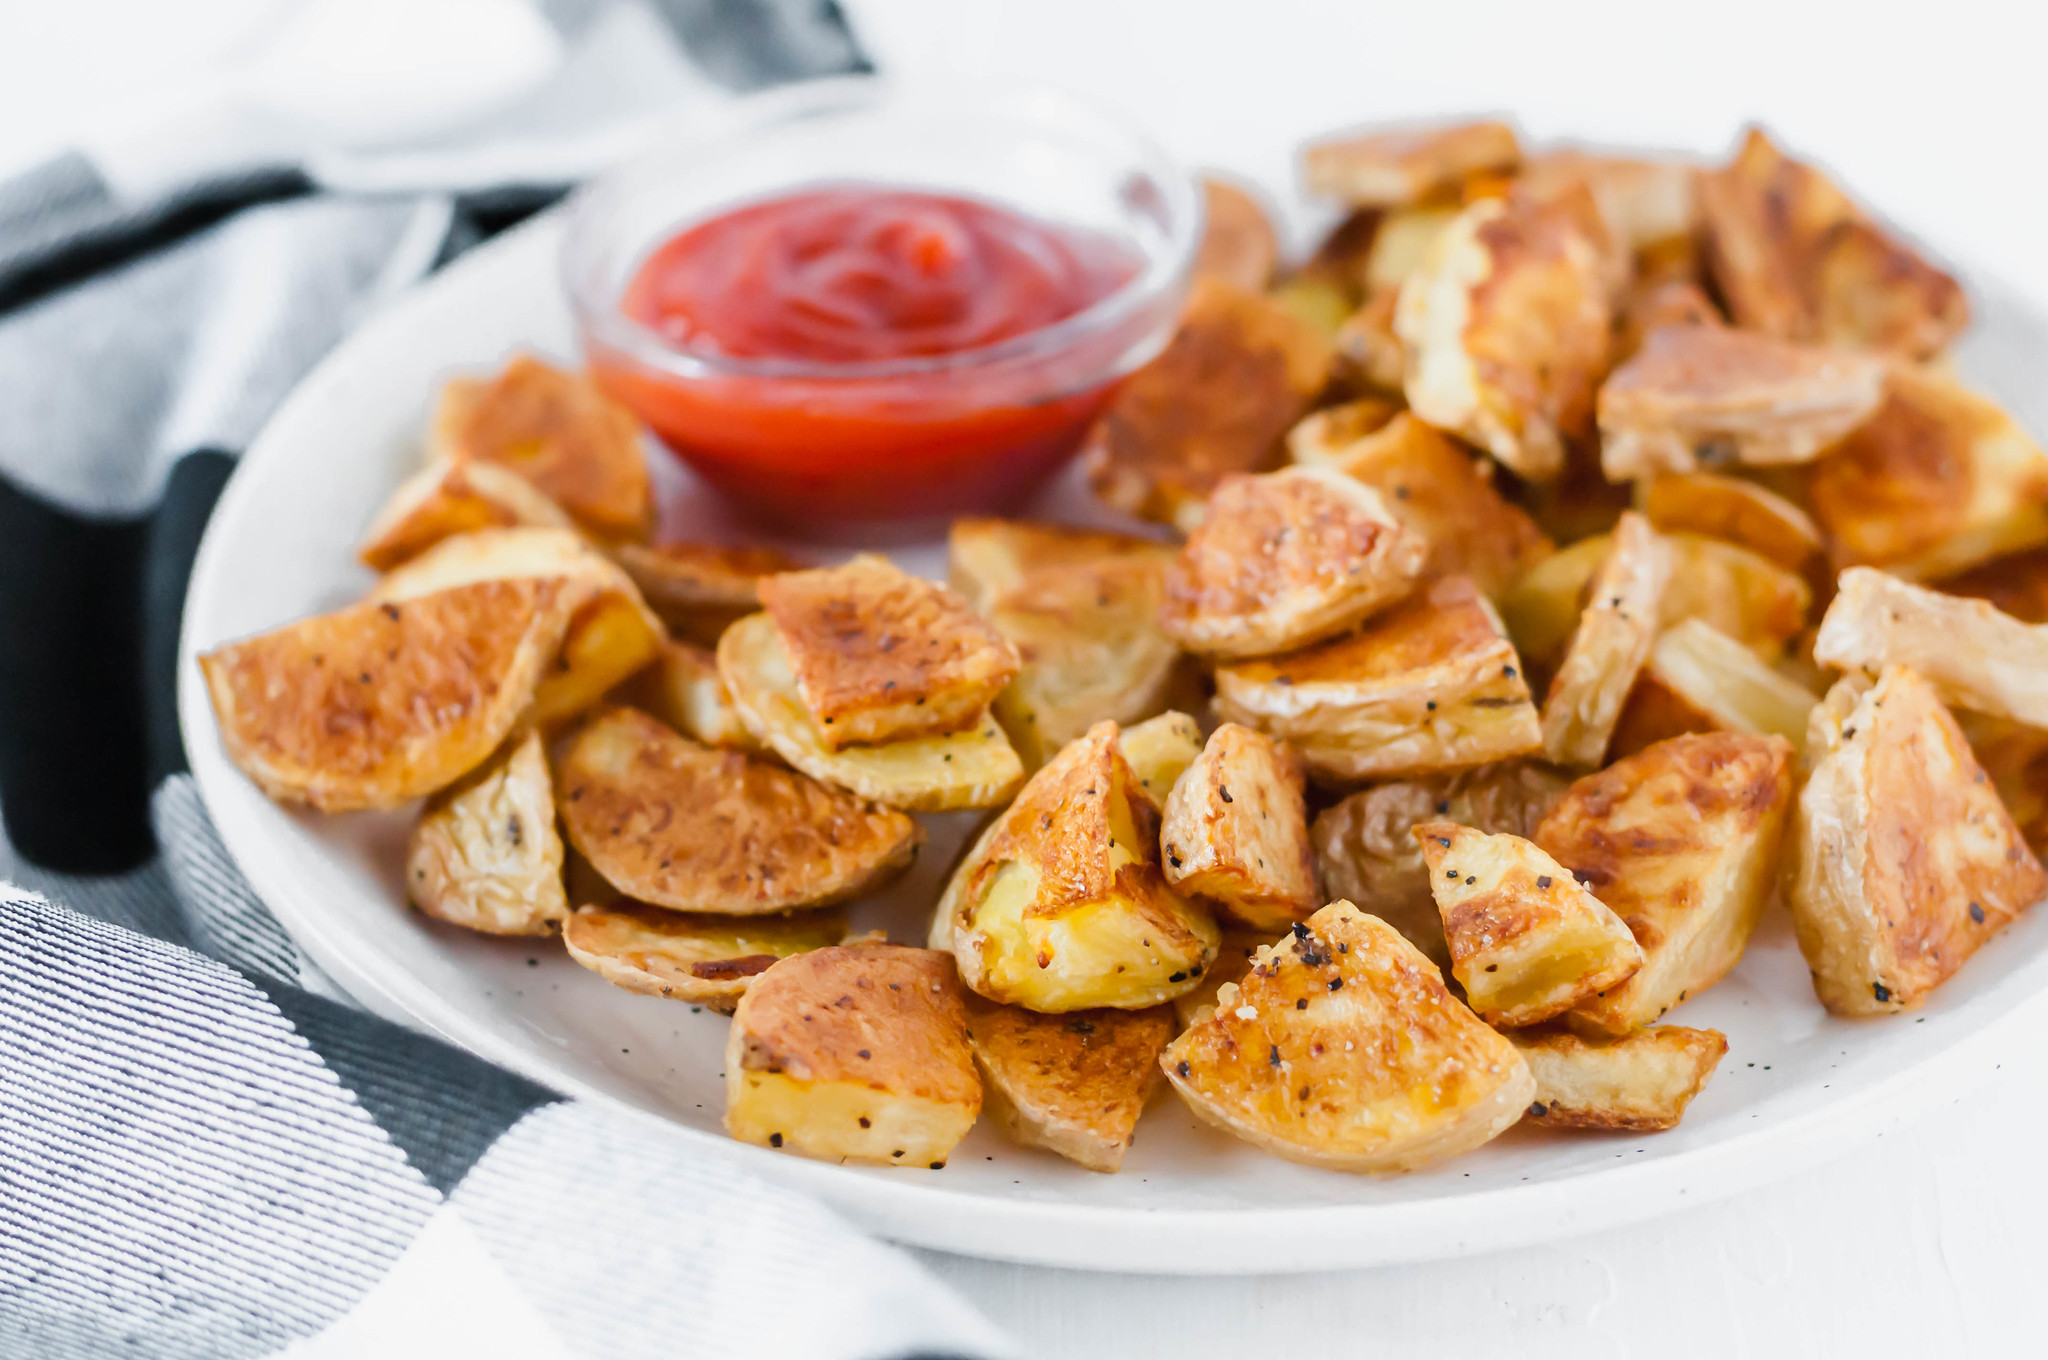 Learn how to make the crispiest potatoes around. These Crispy Roasted Potatoes are simple to make. The crispy exterior and tender, fluffy interior will blow your mind. Read the post for all the tips on making crispy roasted potatoes.